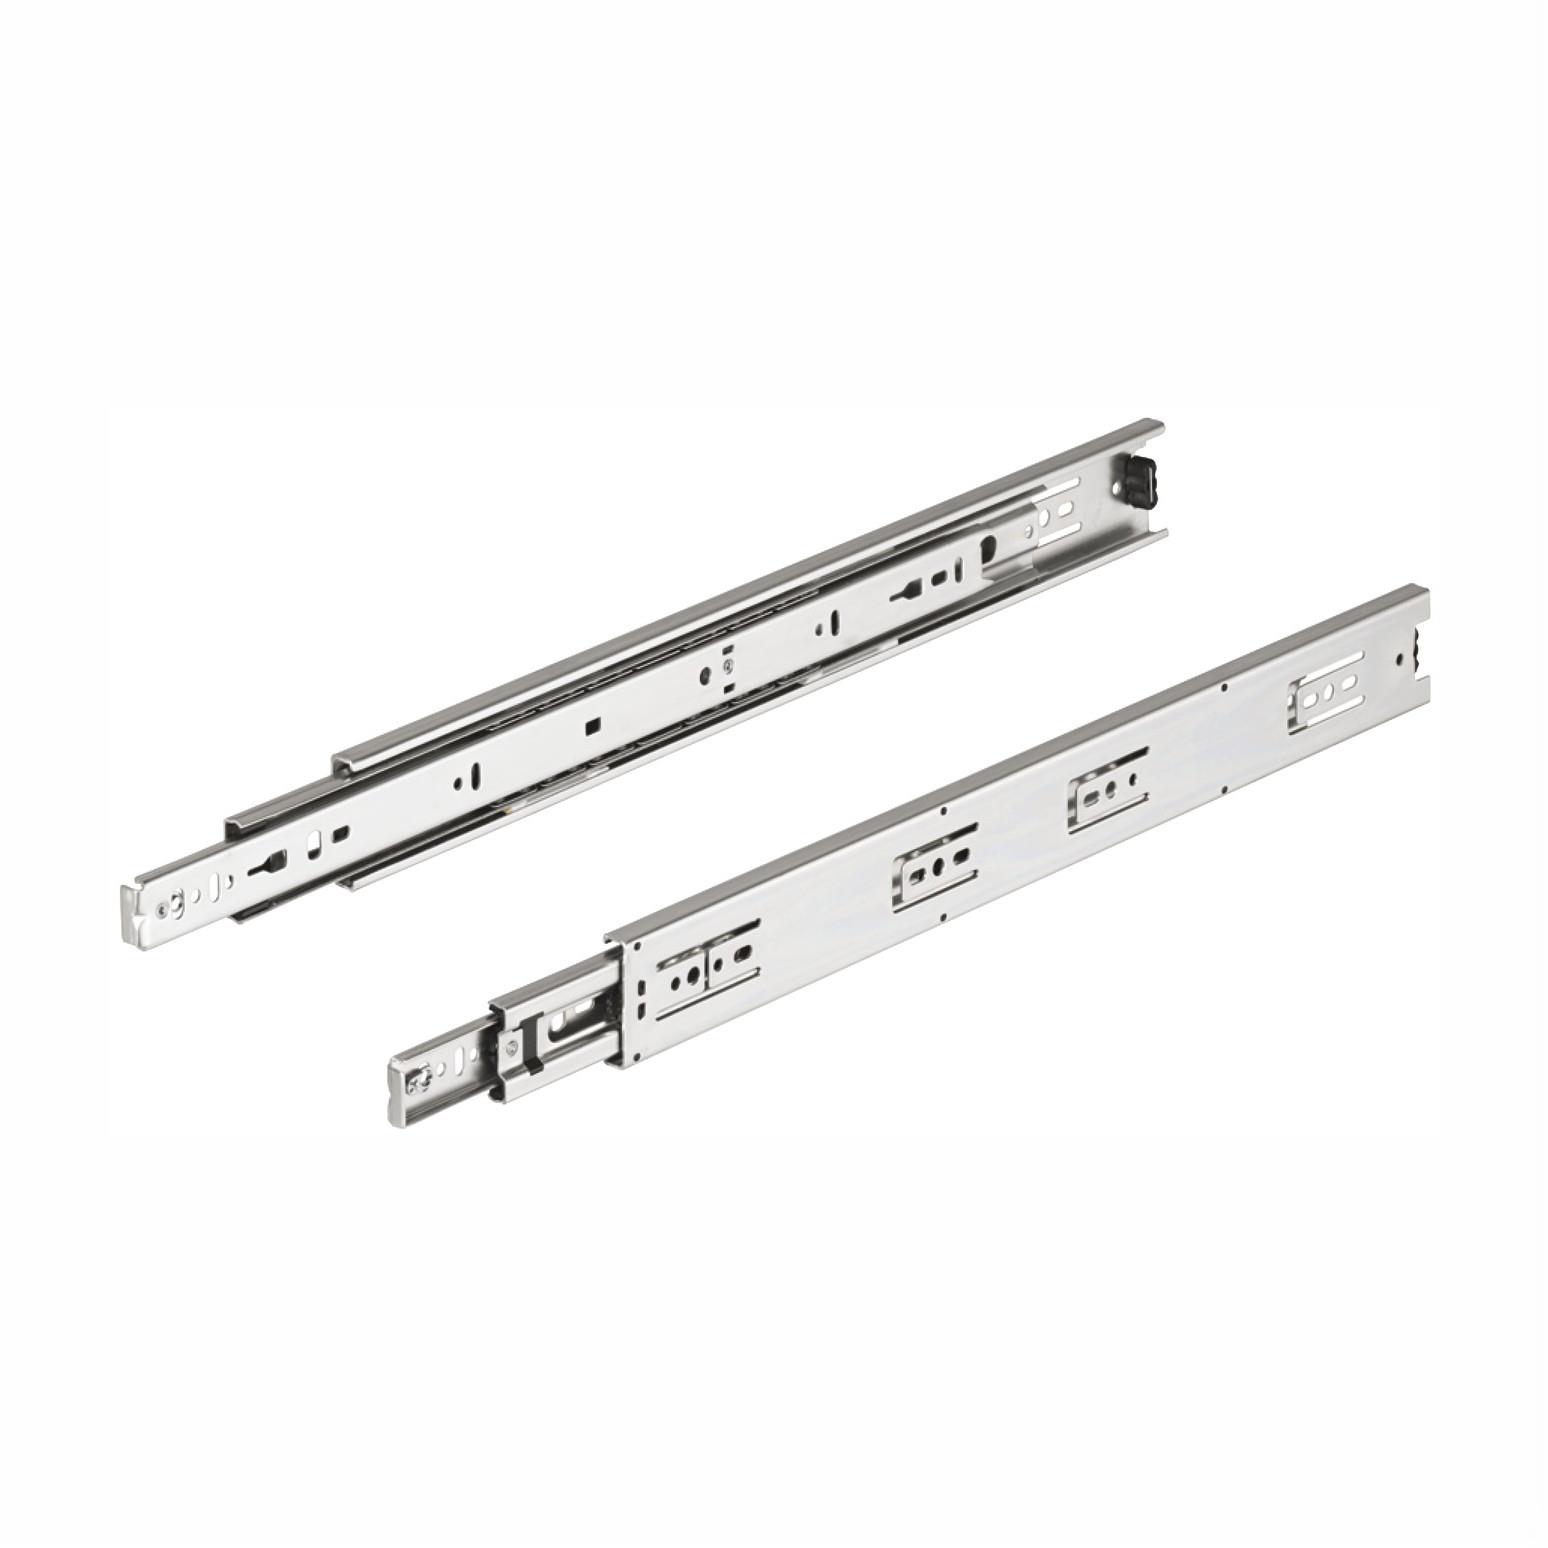 Hafele 422.41.945 Front Disconnect Ball Bearing Drawer Runners; Full Extension; Installation Length 450mm; Extension Length 457mm; Load Capacity Up To 50 kg; Accuride 3832